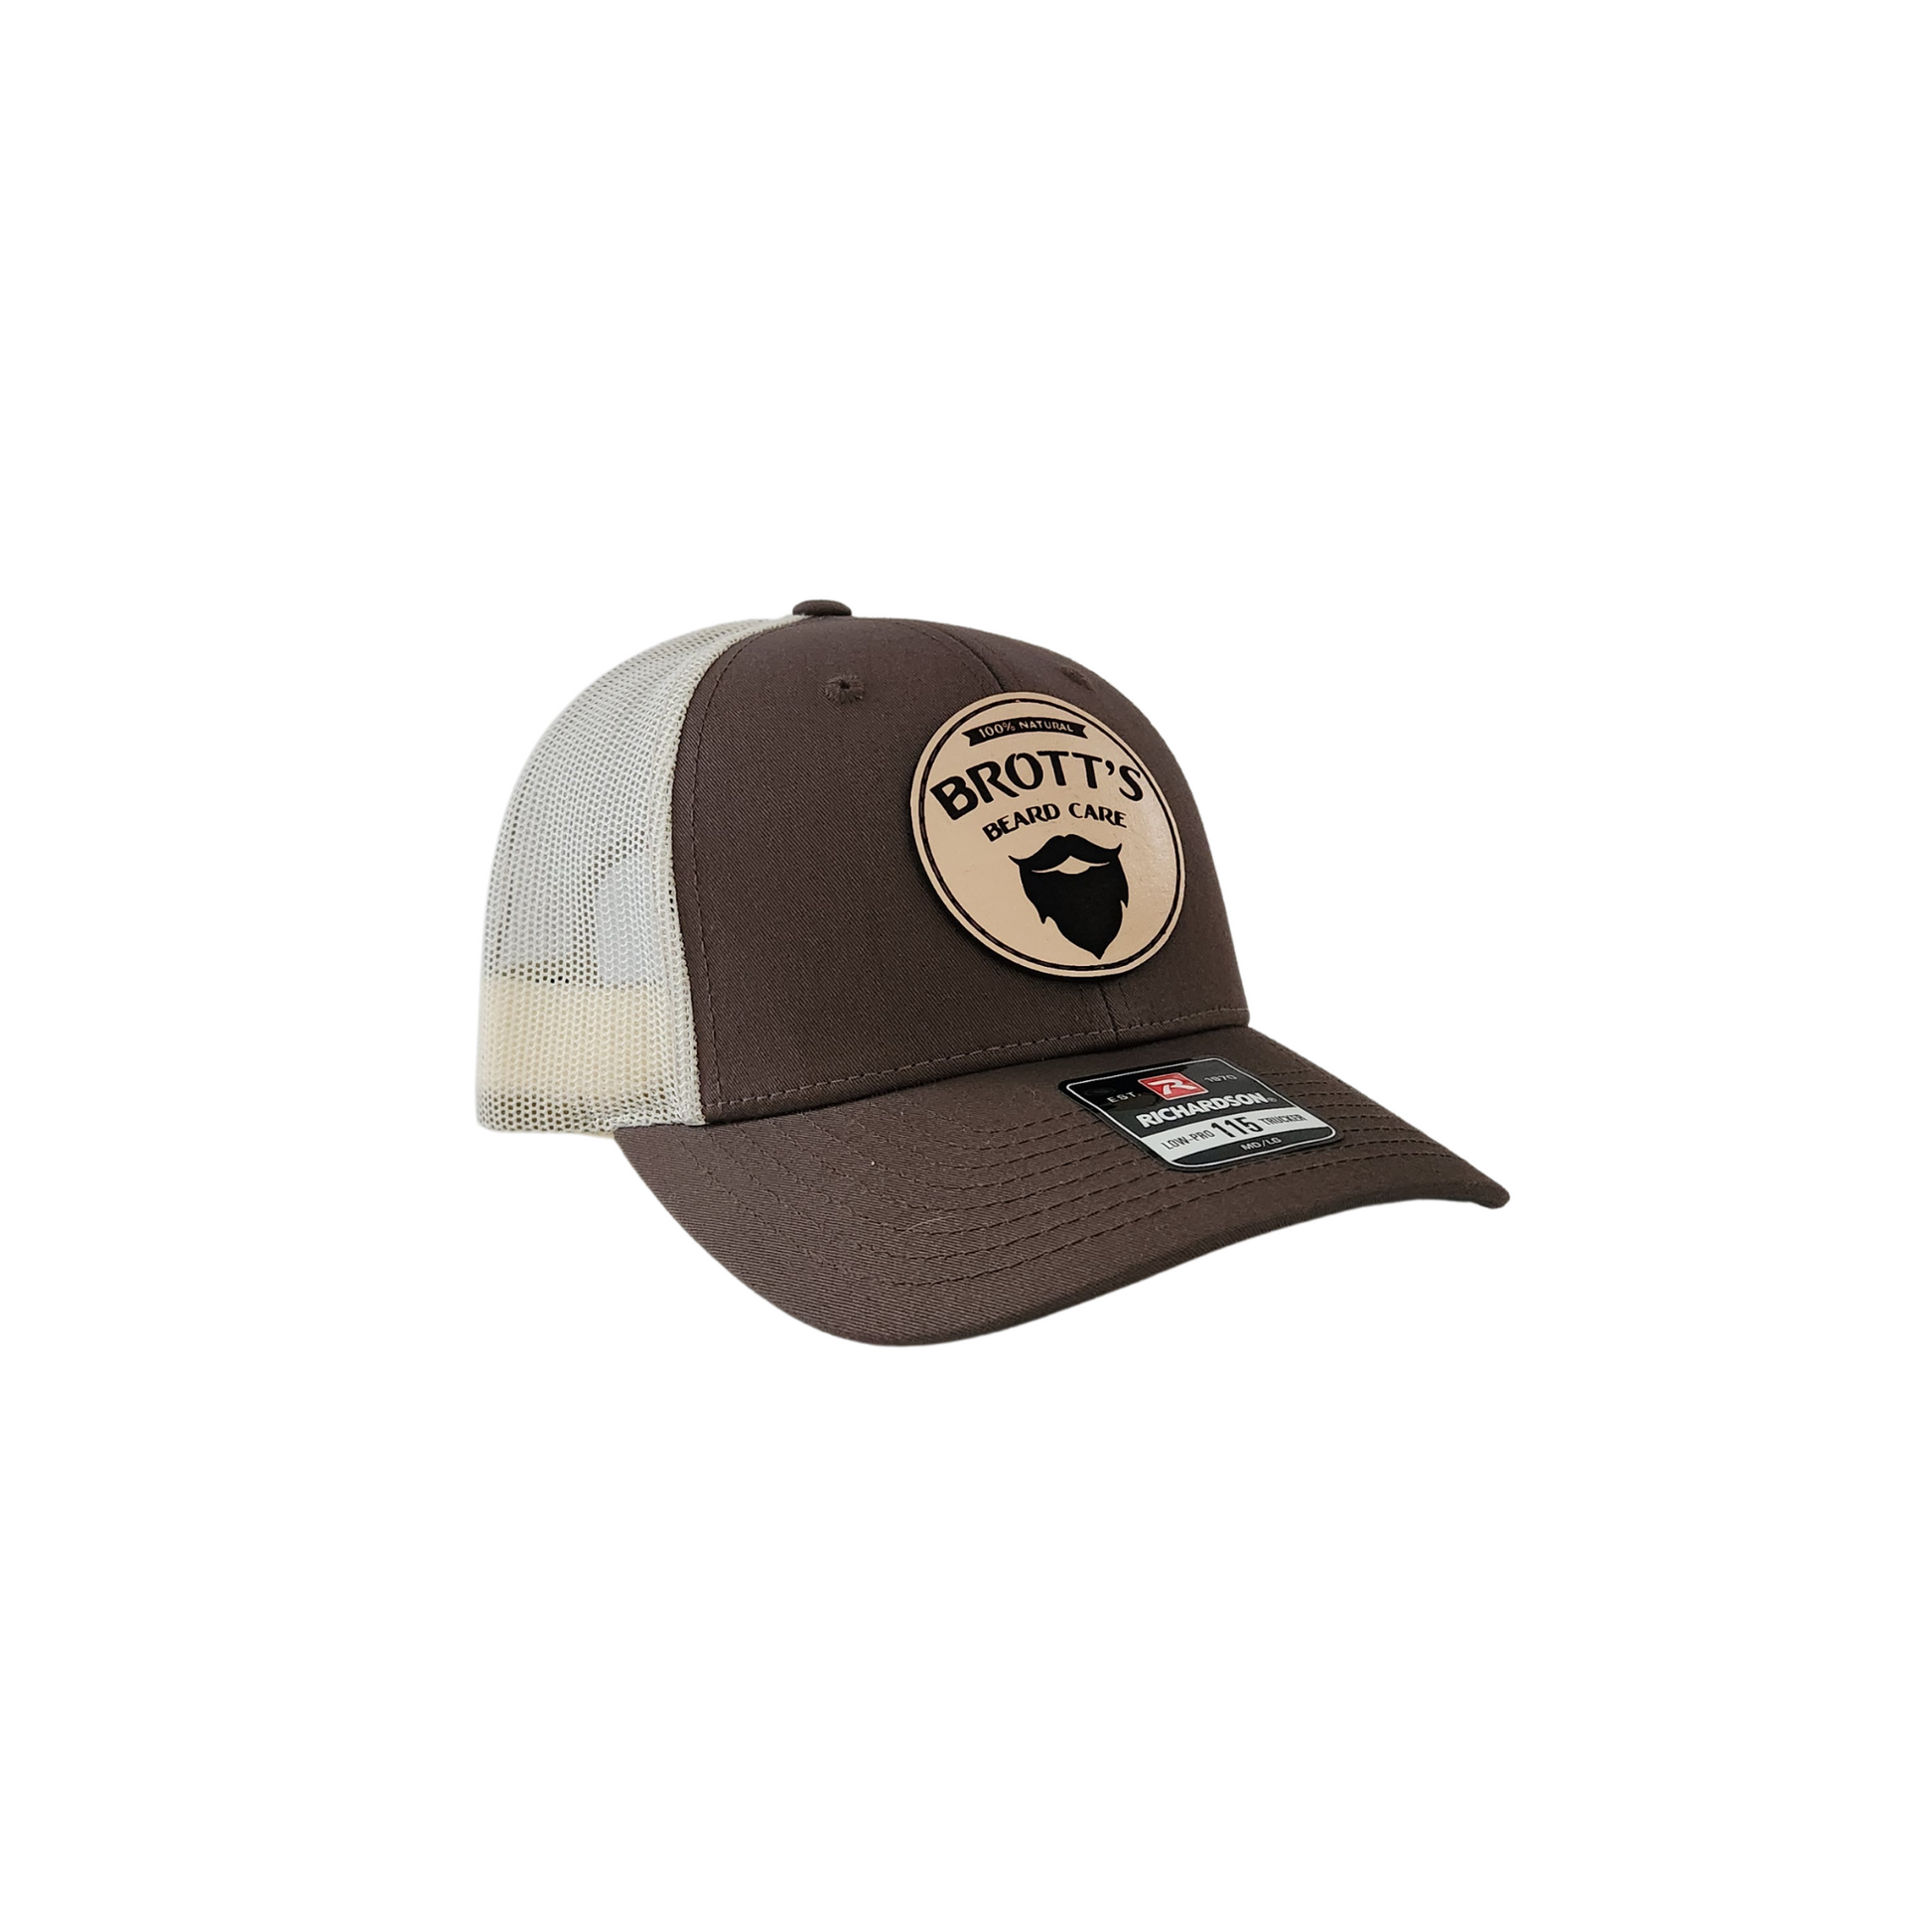 Chocolate chip and birch colored mesh trucker hat with Brott's Beard Care leather patch logo and snapback closure